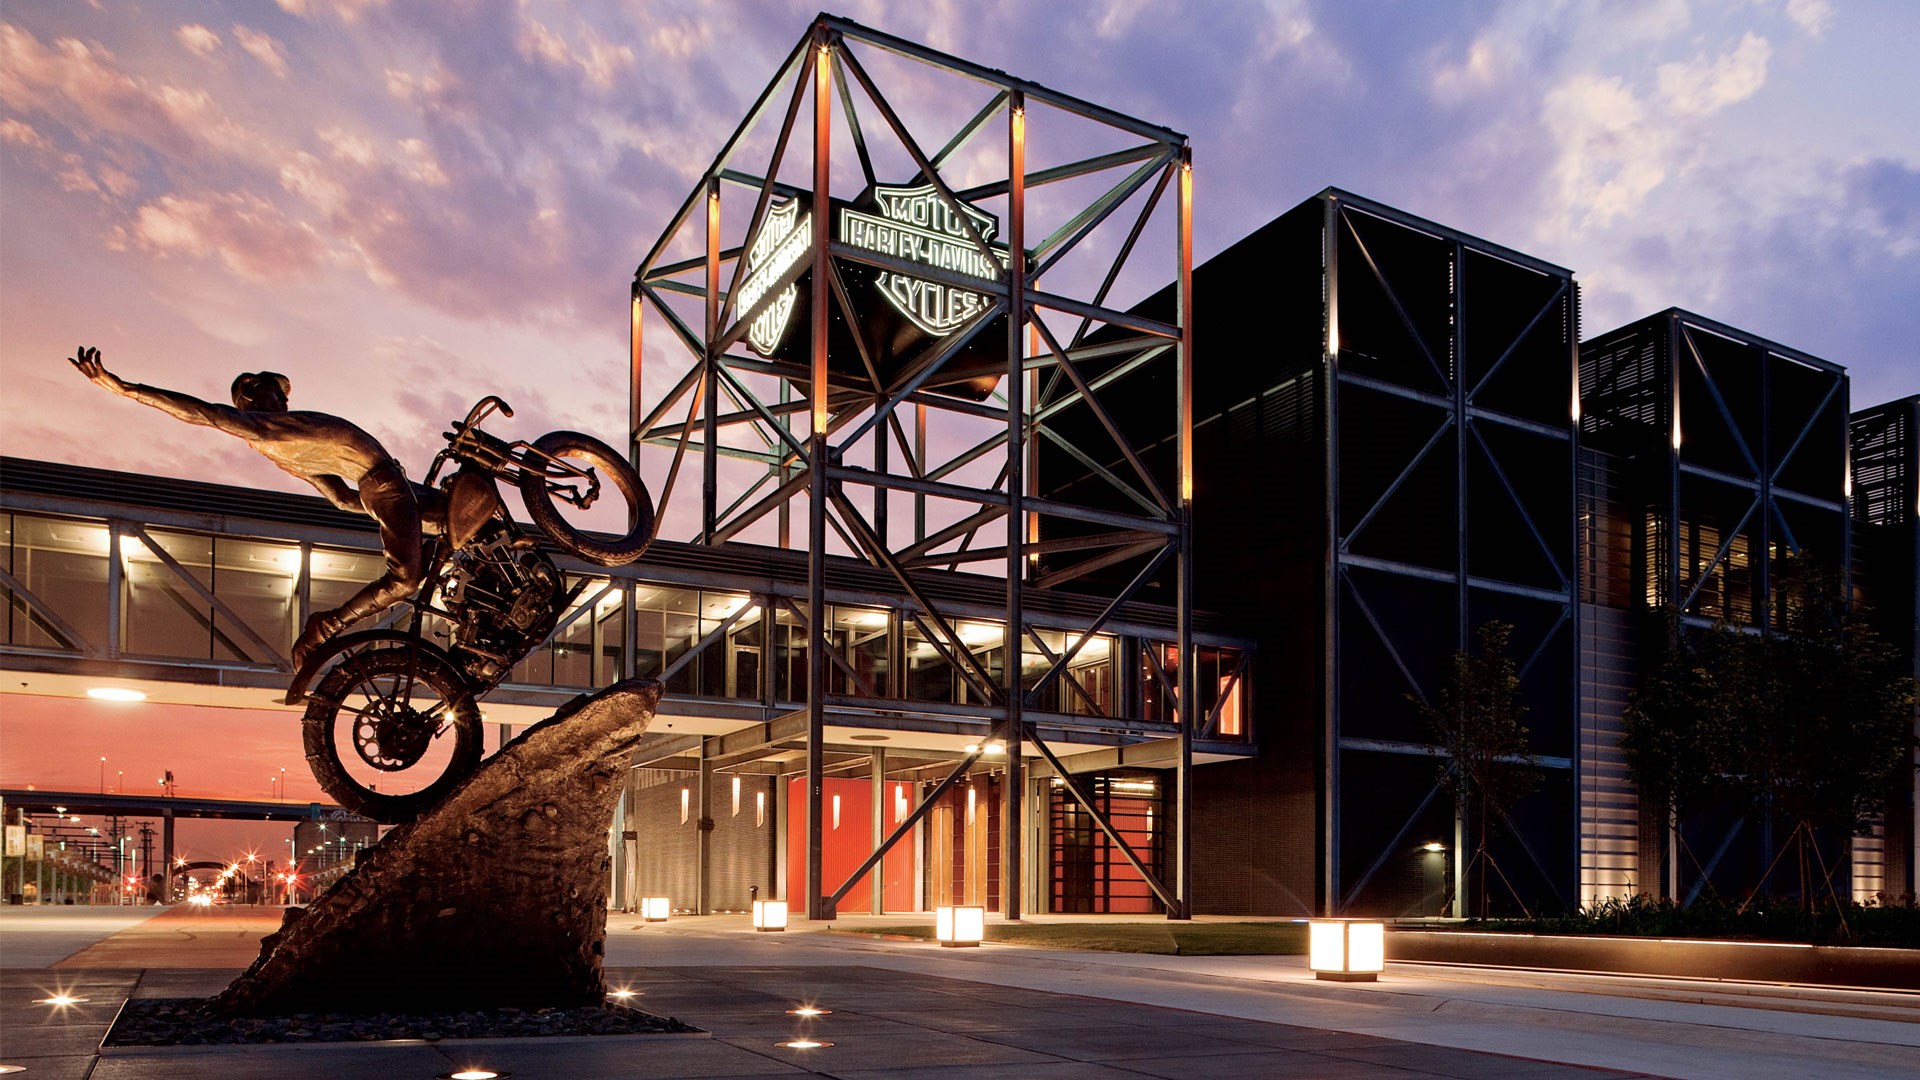 A view of Harley-Davidson's museum